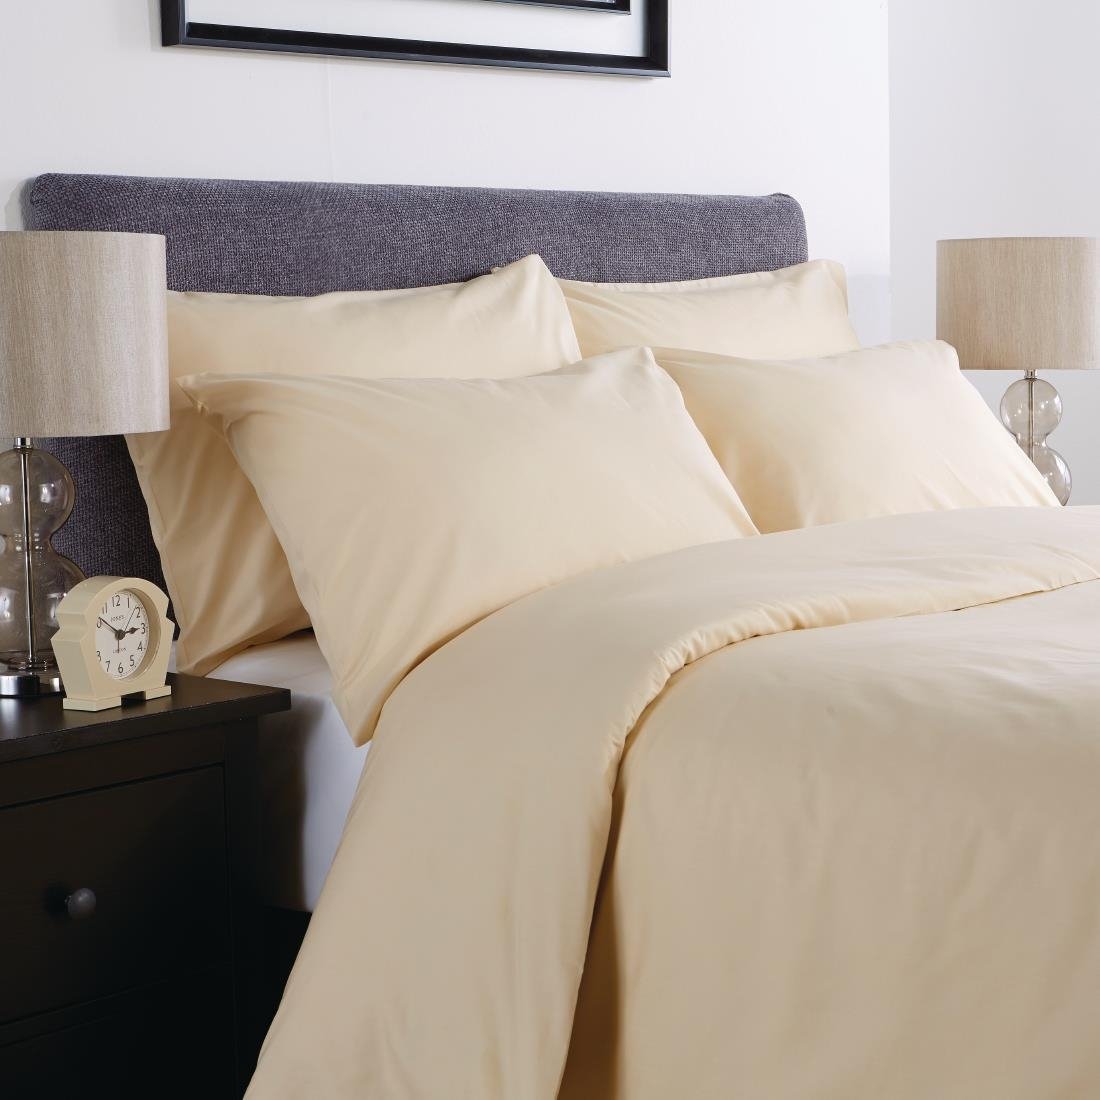 GU155 Mitre Comfort Percale Fitted Sheet Oatmeal Double